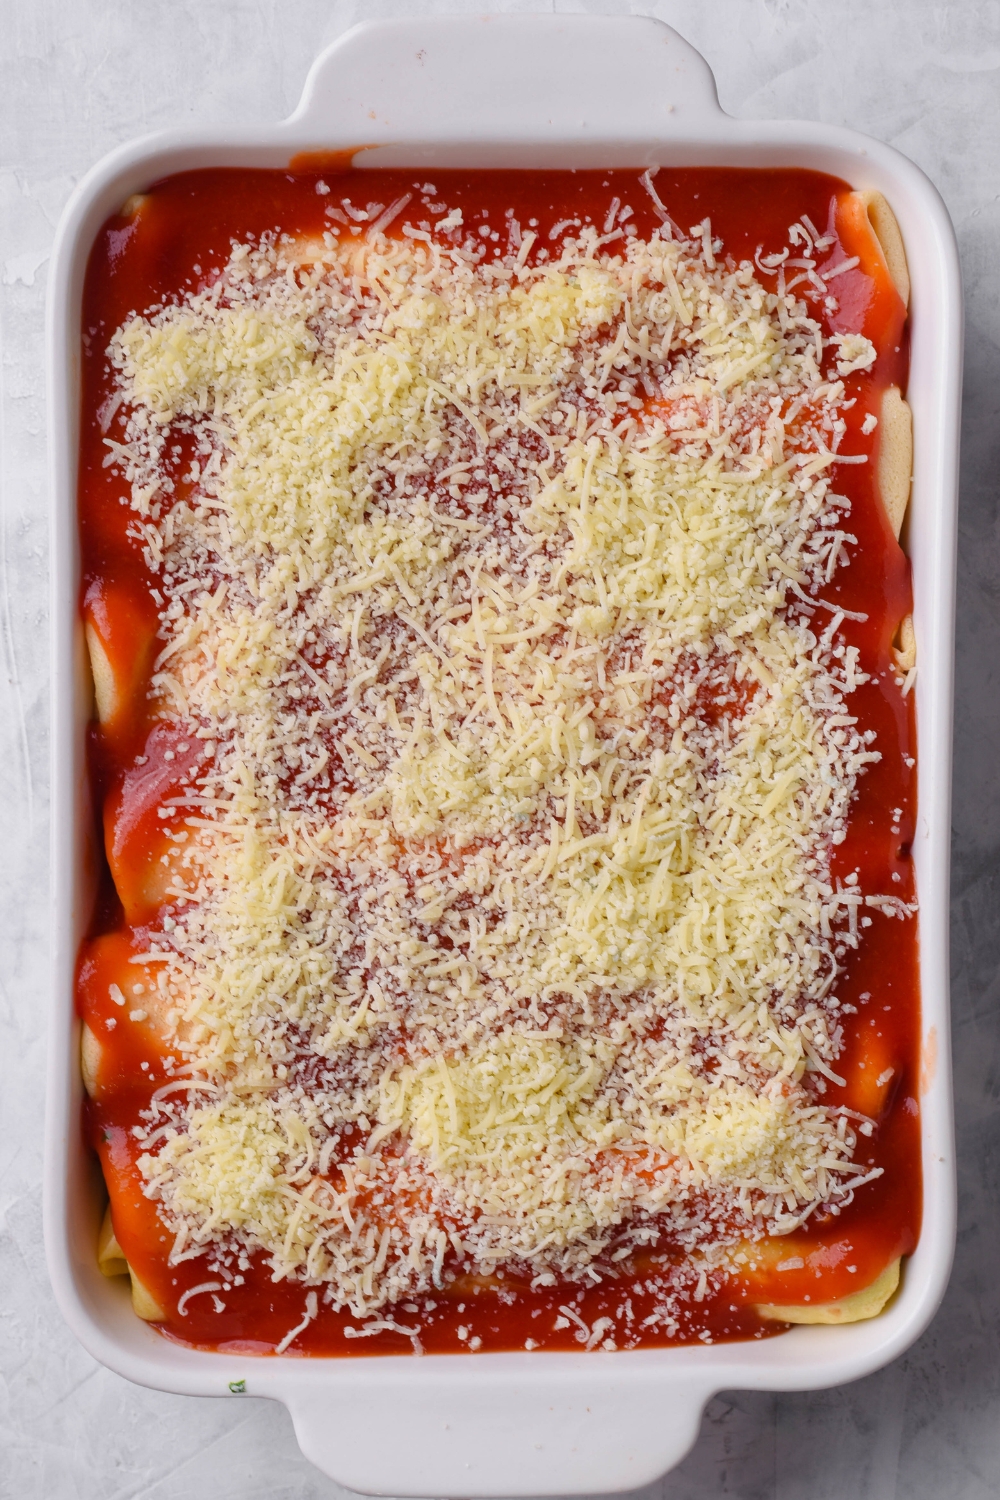 A baking dish with unbaked manicotti crepes.